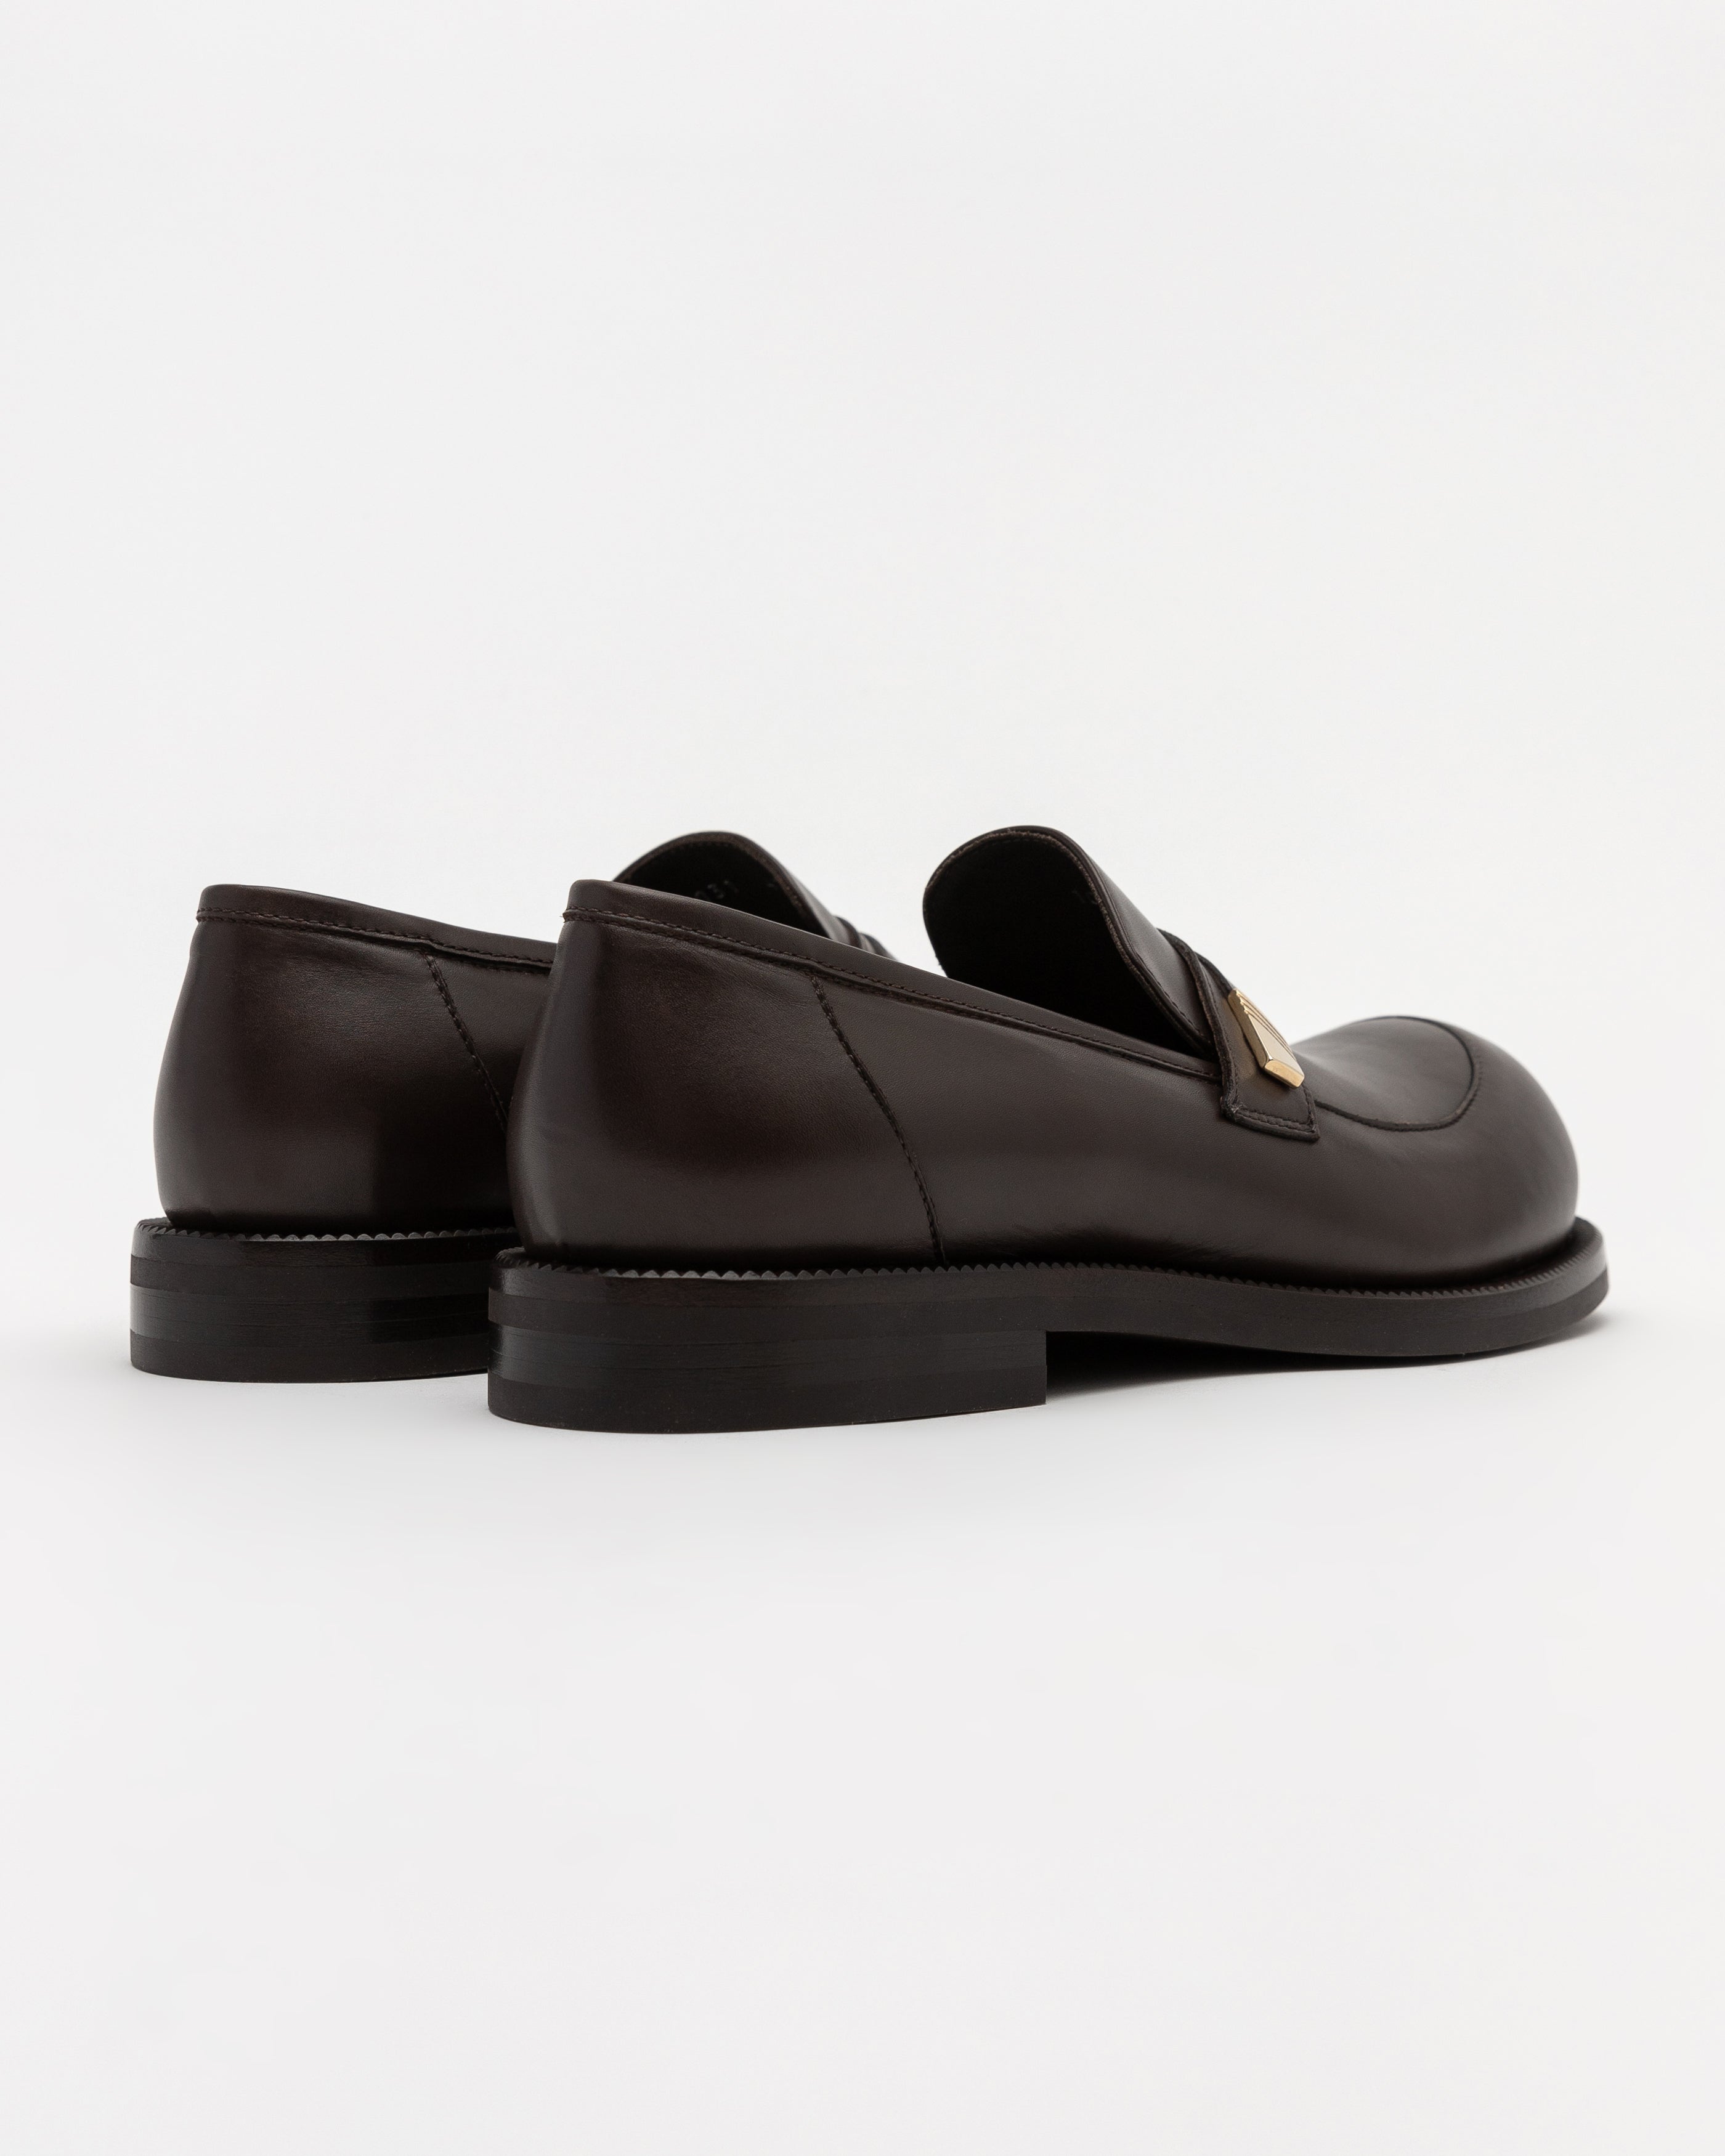 Bulb Toe Loafer in Brown